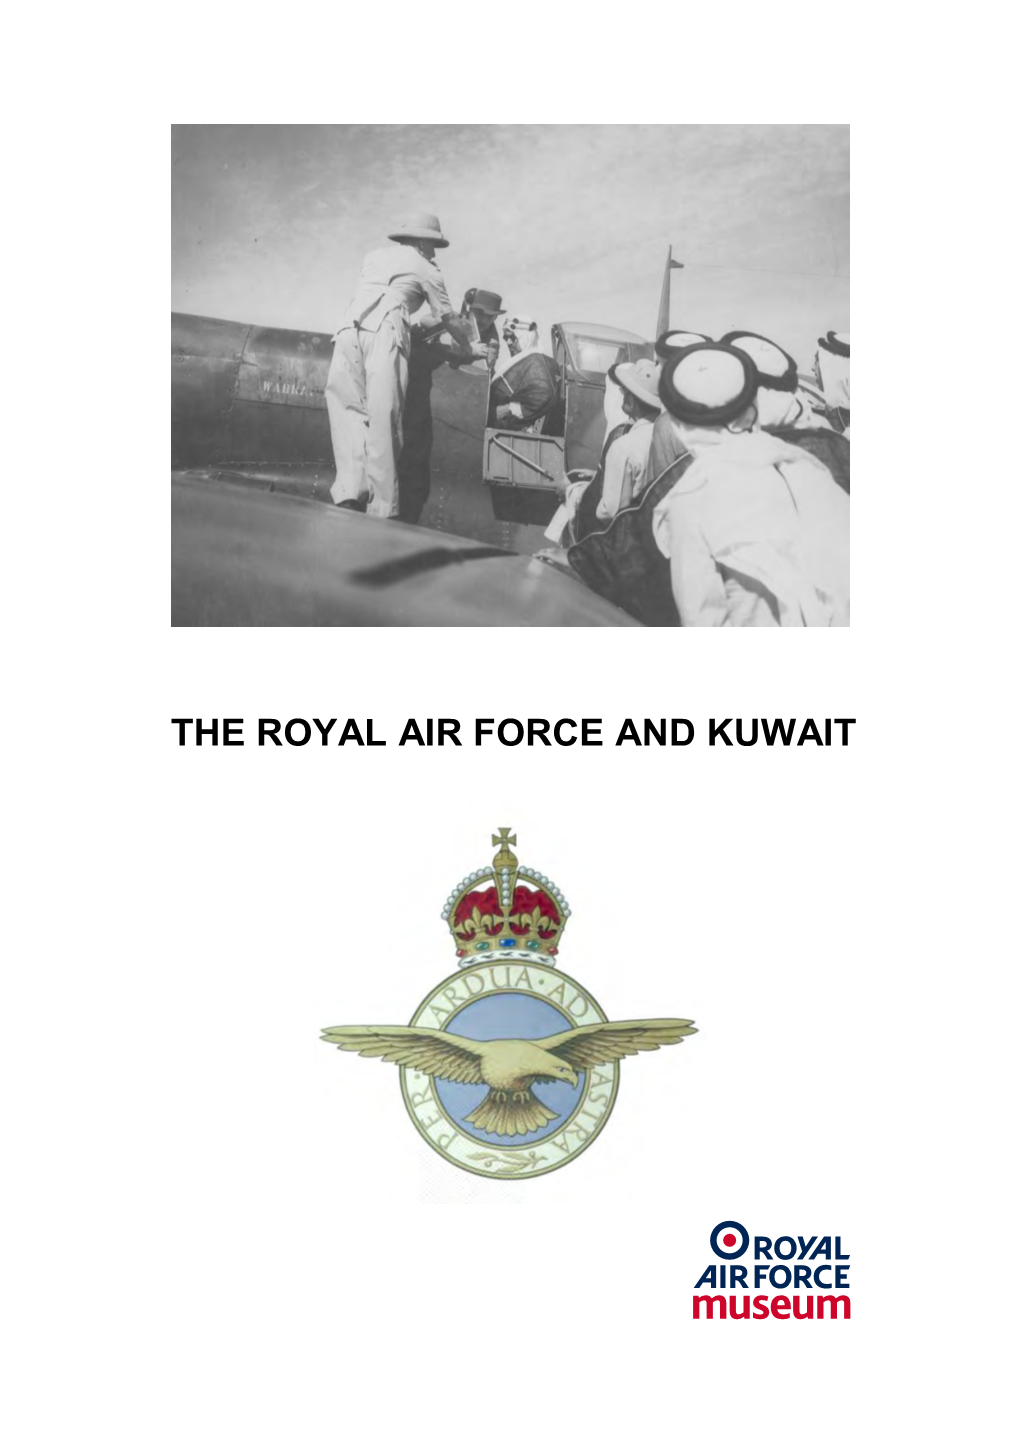 The Royal Air Force and Kuwait